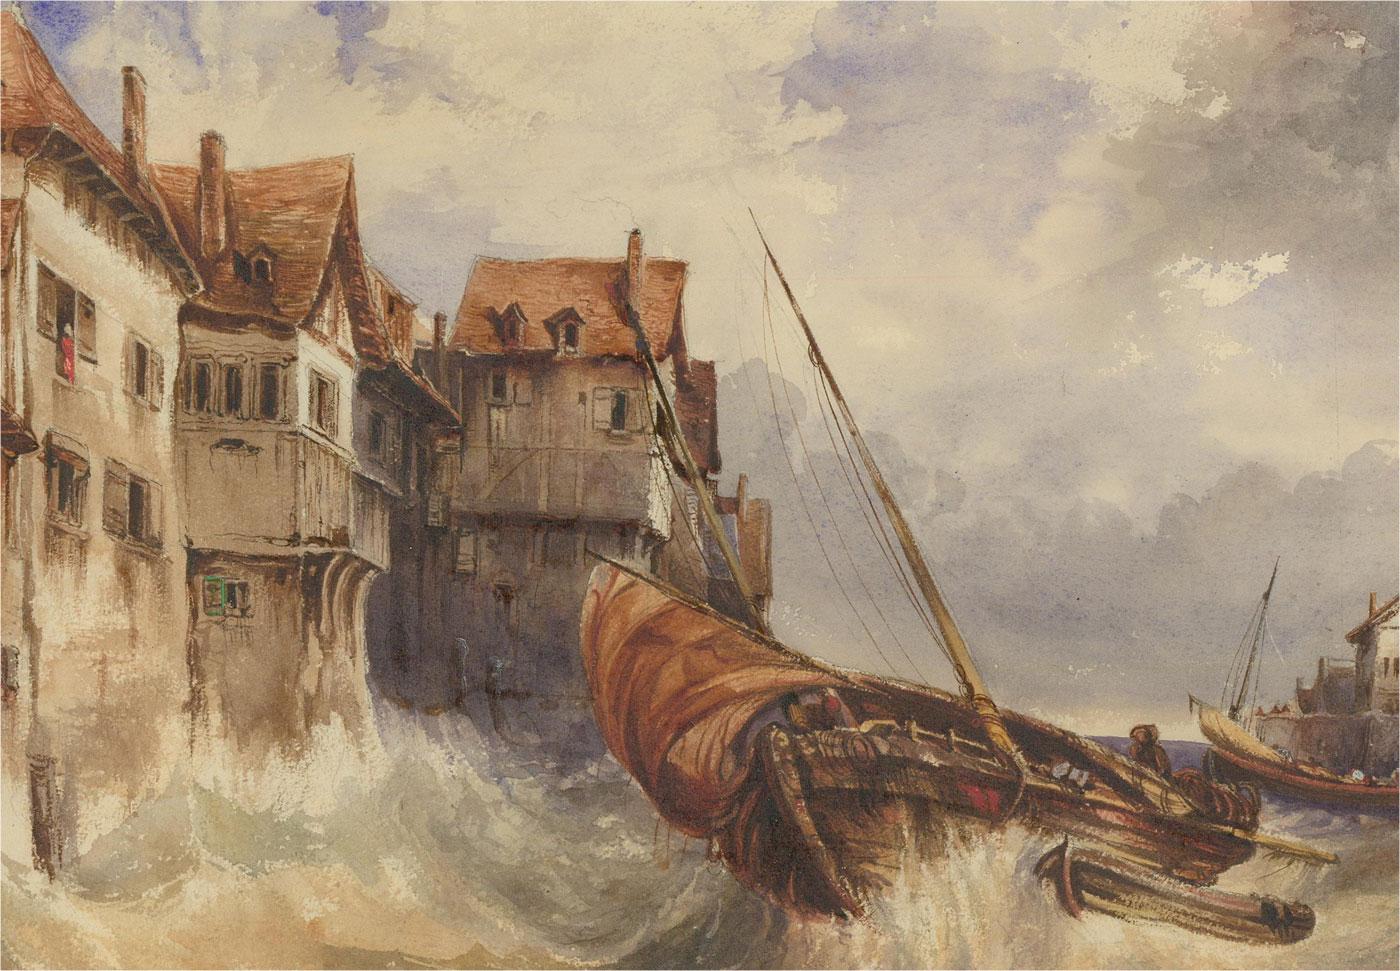 A well presented watercolour painting, depicting a blustery and unsteady day in the harbour. Waves have been captured by the artist crashing against coastal homes, while the little boat seems to be almost capsized. The colour palette of the painting